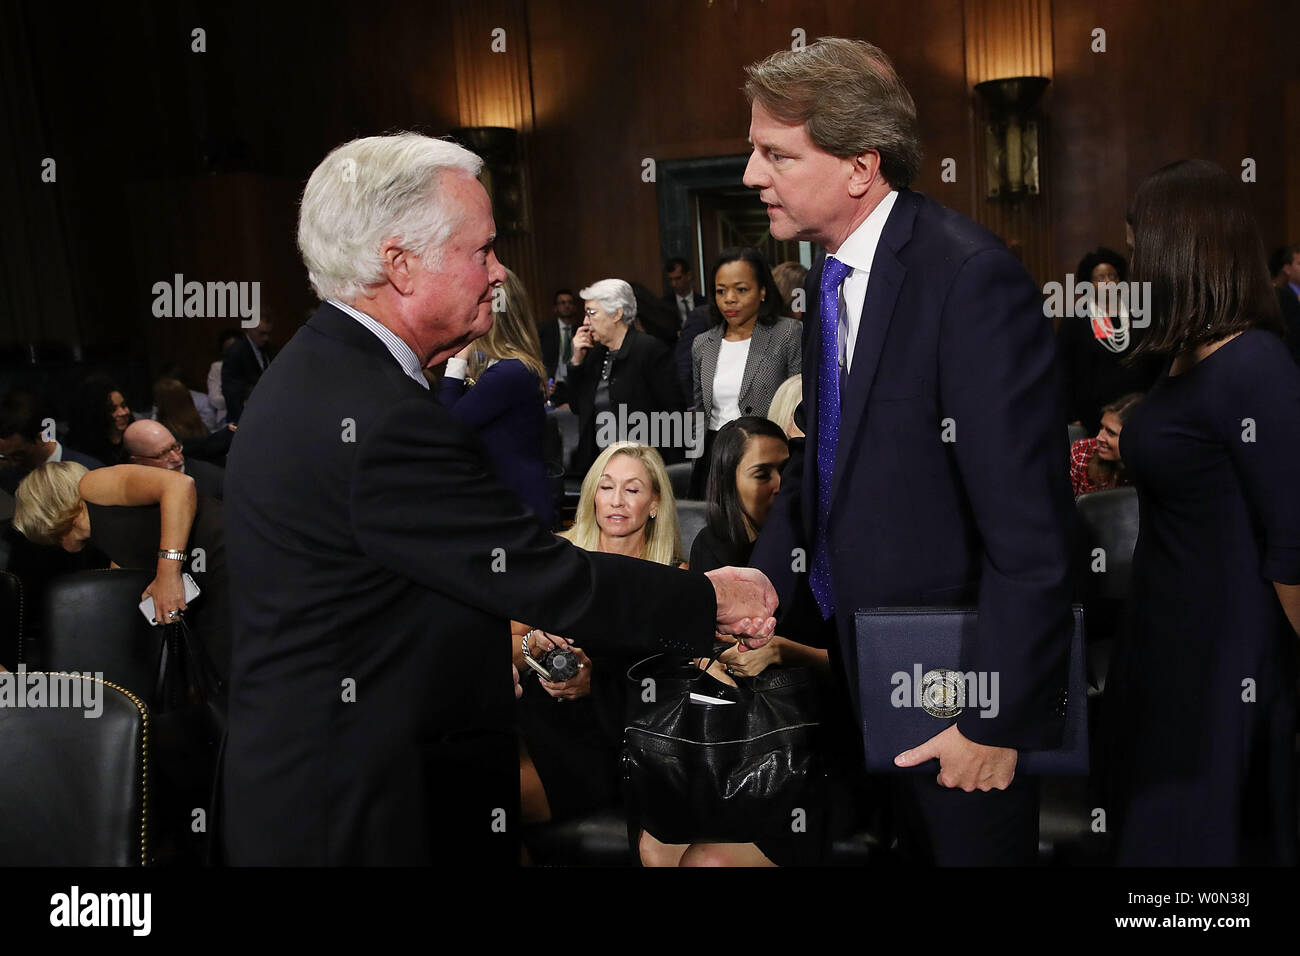 Judge Brett Kavanaugh's father Everett Kavanaugh (L) shakes hands with White House Counsel Don McGahn at the conclusion of Supreme Court nominee Judge Brett Kavanaugh's confirmation hearing before the Senate Judiciary Committee in the Dirksen Senate Office Building on Capitol Hill September 27, 2018 in Washington, DC. Kavanaugh was called back to testify about claims by Christine Blasey Ford, who has accused him of sexually assaulting her during a party in 1982 when they were high school students in suburban Maryland.  Photo by Win McNamee/UPI Stock Photo